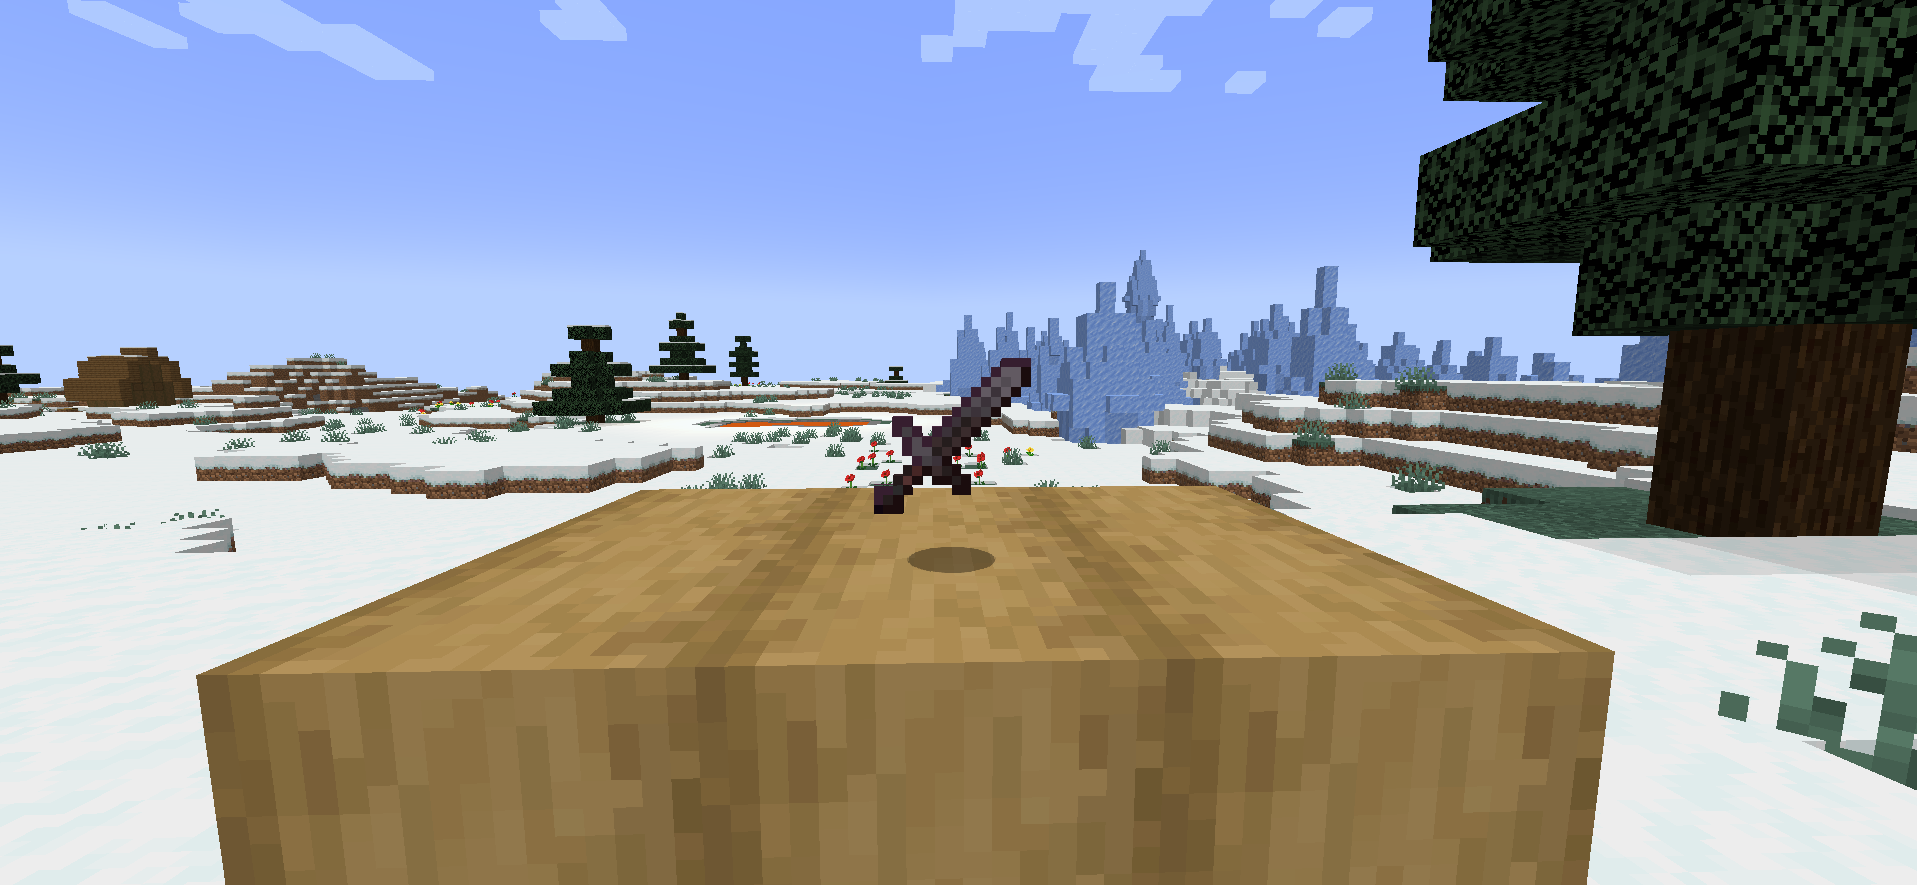 Netherite Sword - What is the Strongest and Most Powerful Weapon in Minecraft 1.19? (2022)